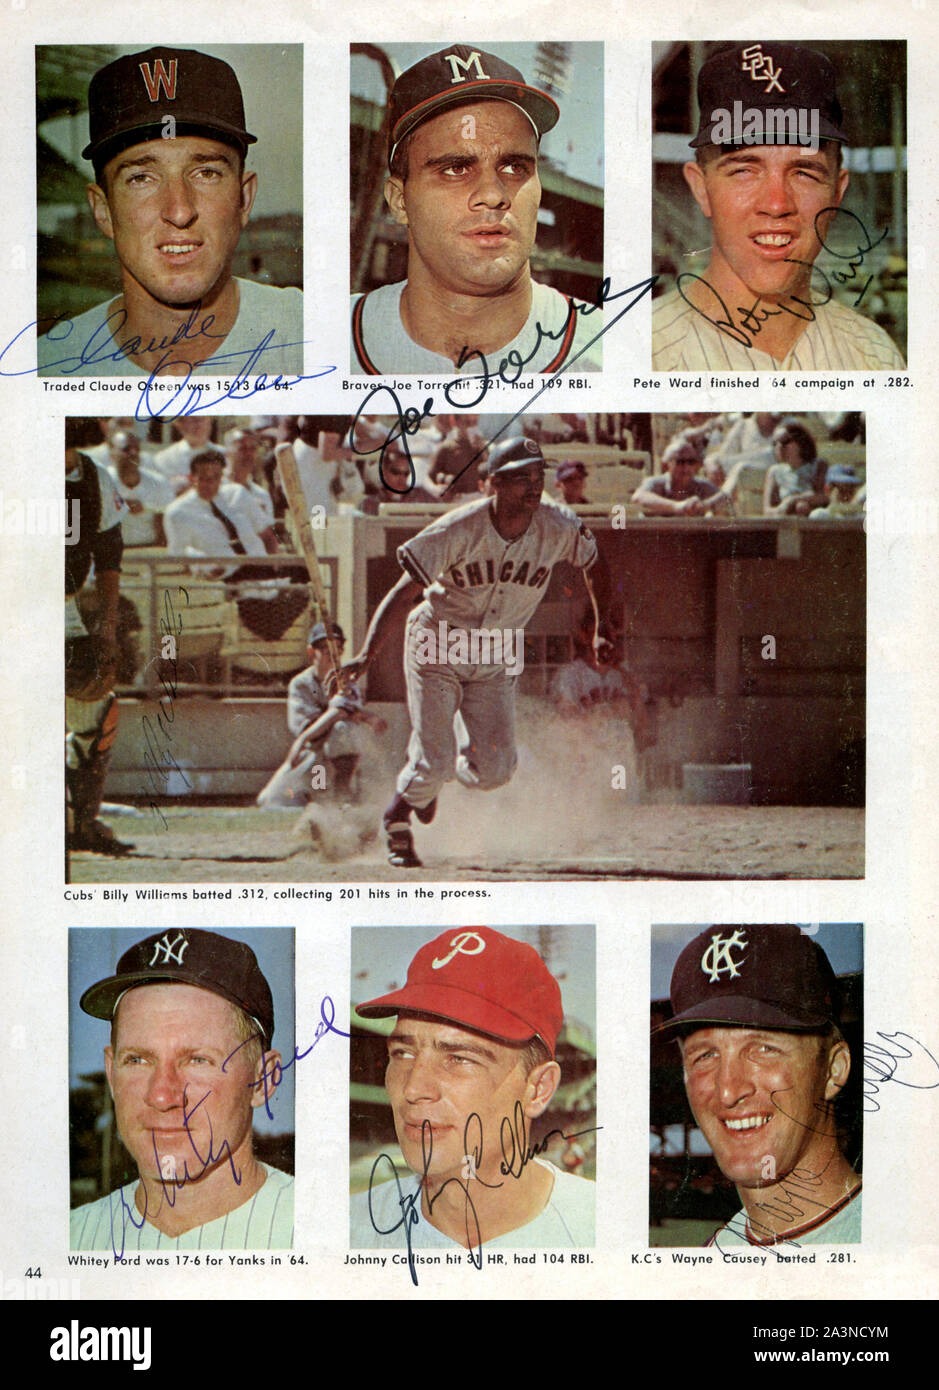 A 1960s era sport magazine page featuring star baseball players with several autographs including Hall of Famers Joe Torre and White Ford. Stock Photo